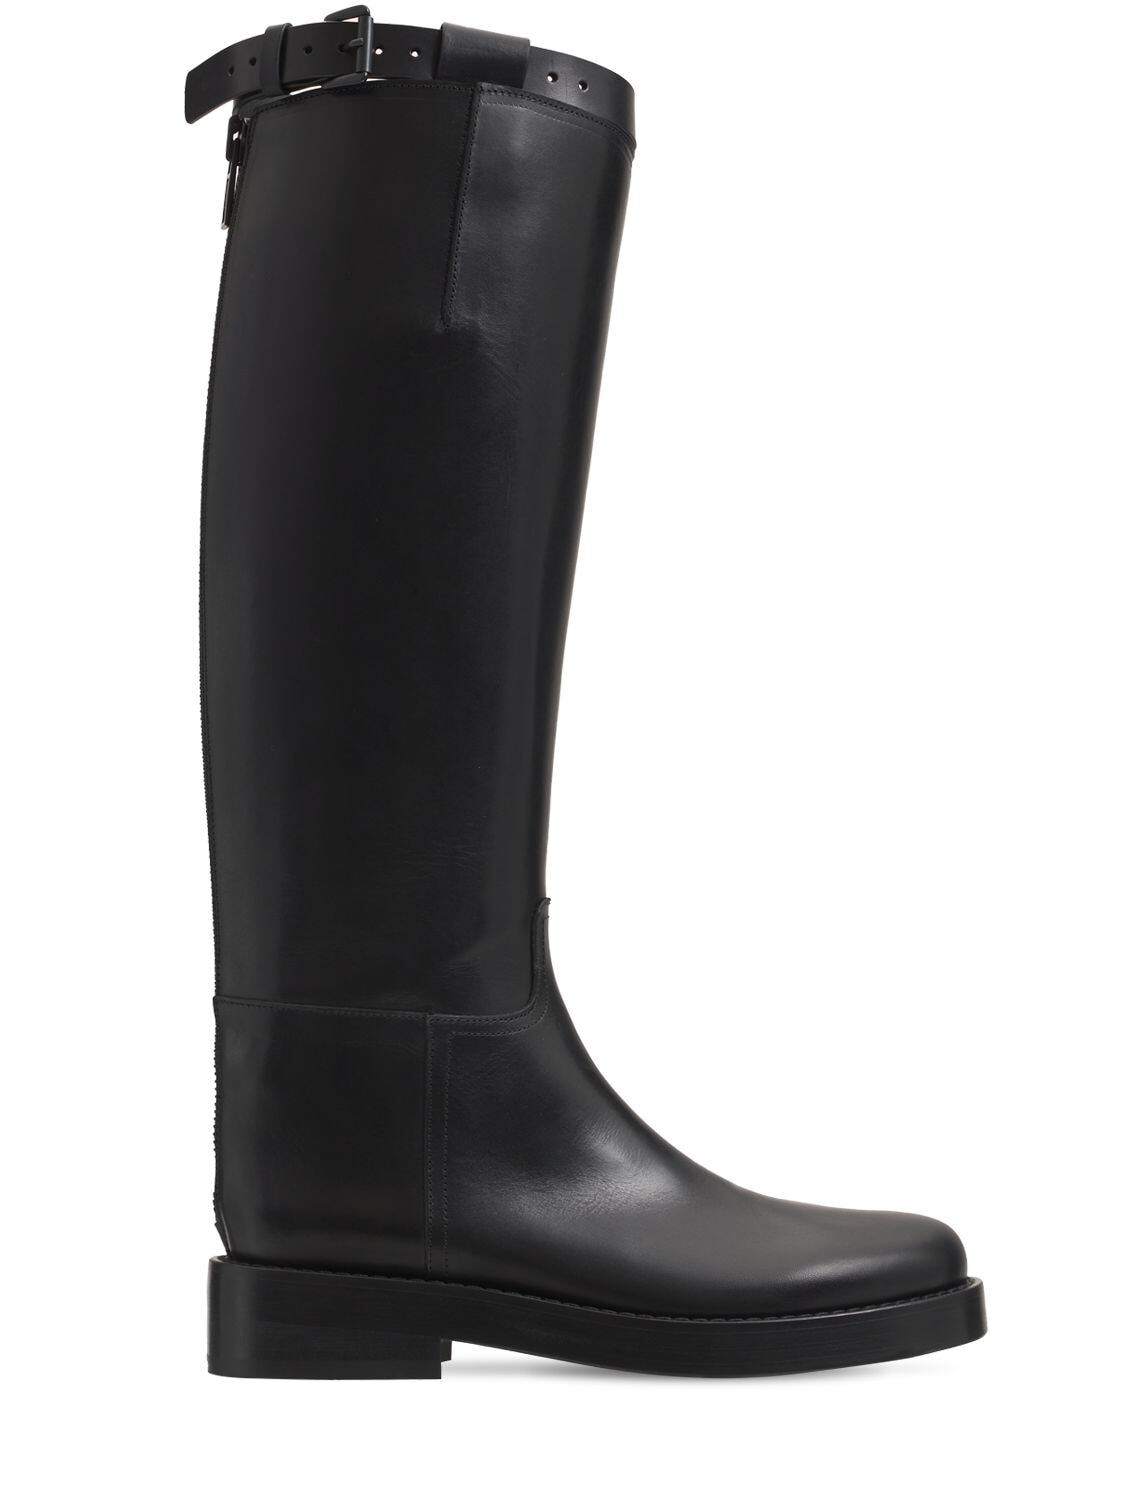 ANN DEMEULEMEESTER 40mm Stan Leather Tall Boots in black